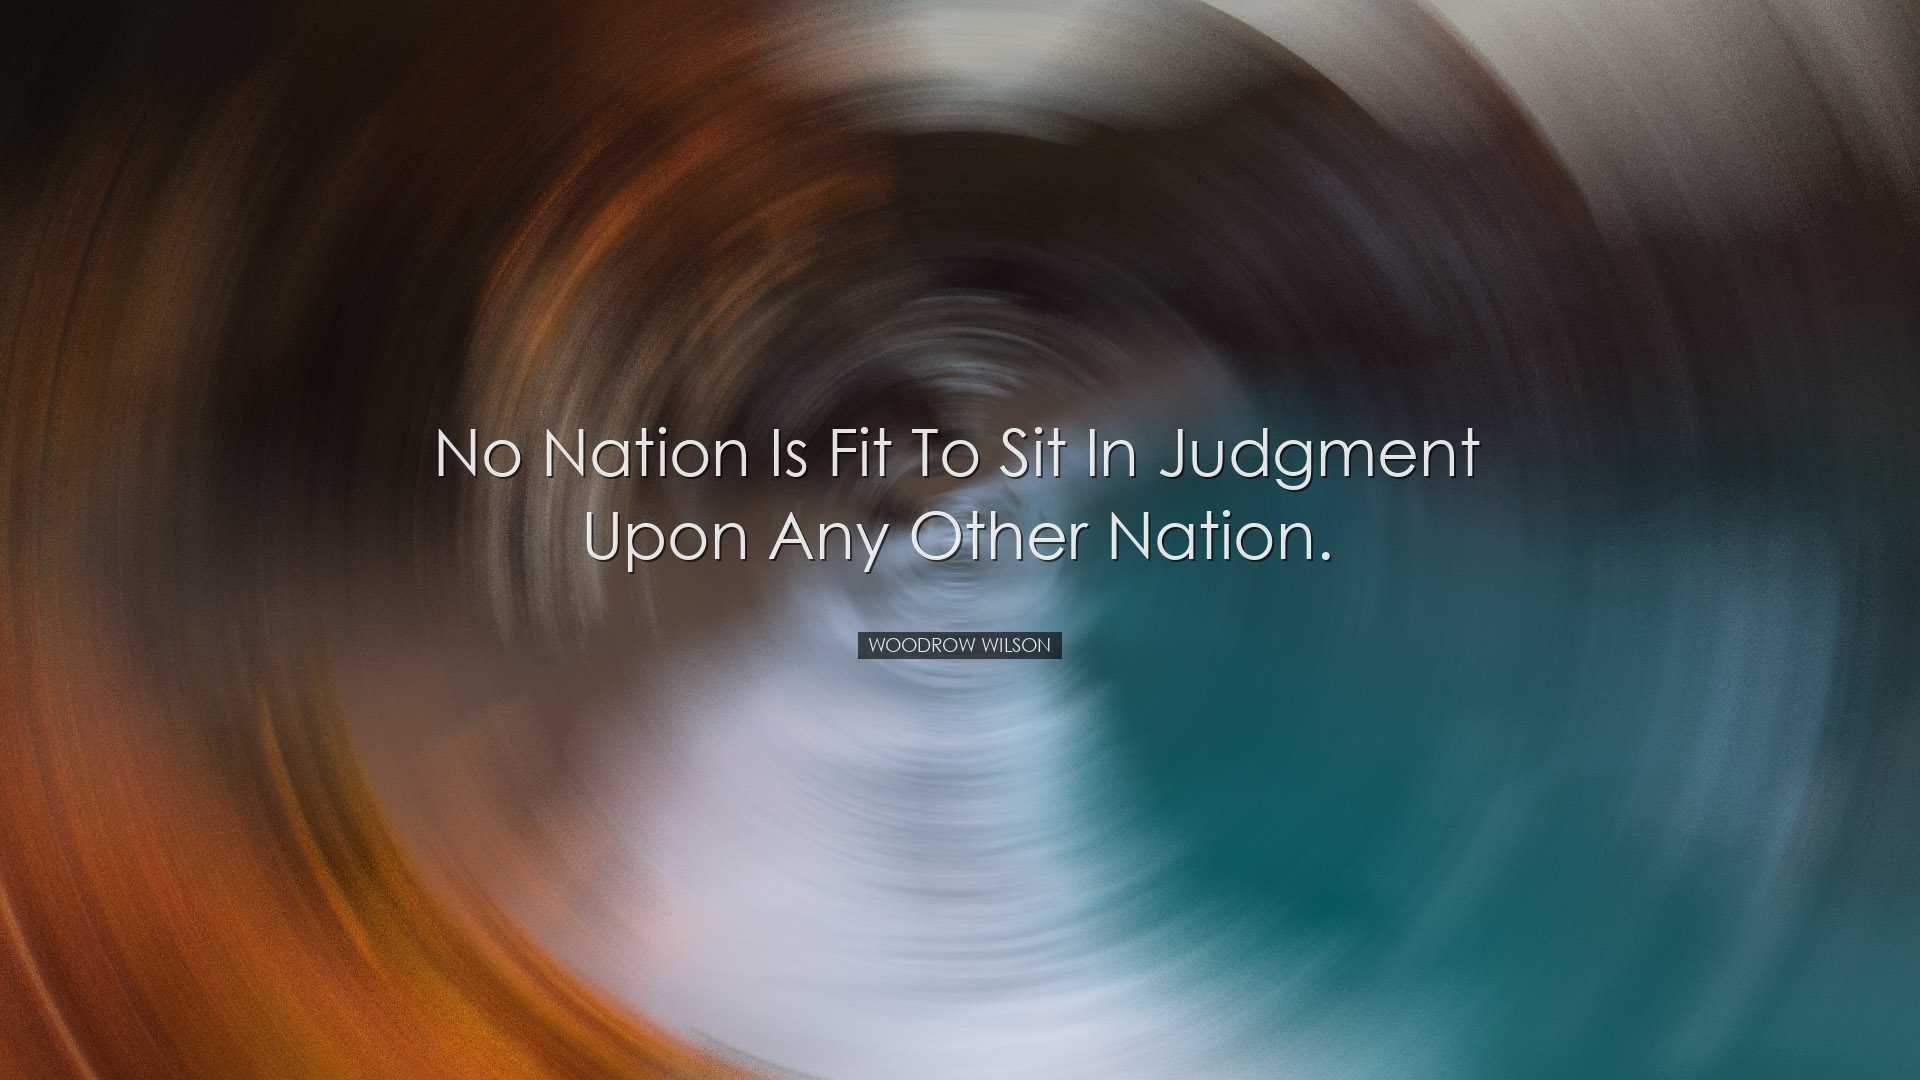 No nation is fit to sit in judgment upon any other nation. - Woodr